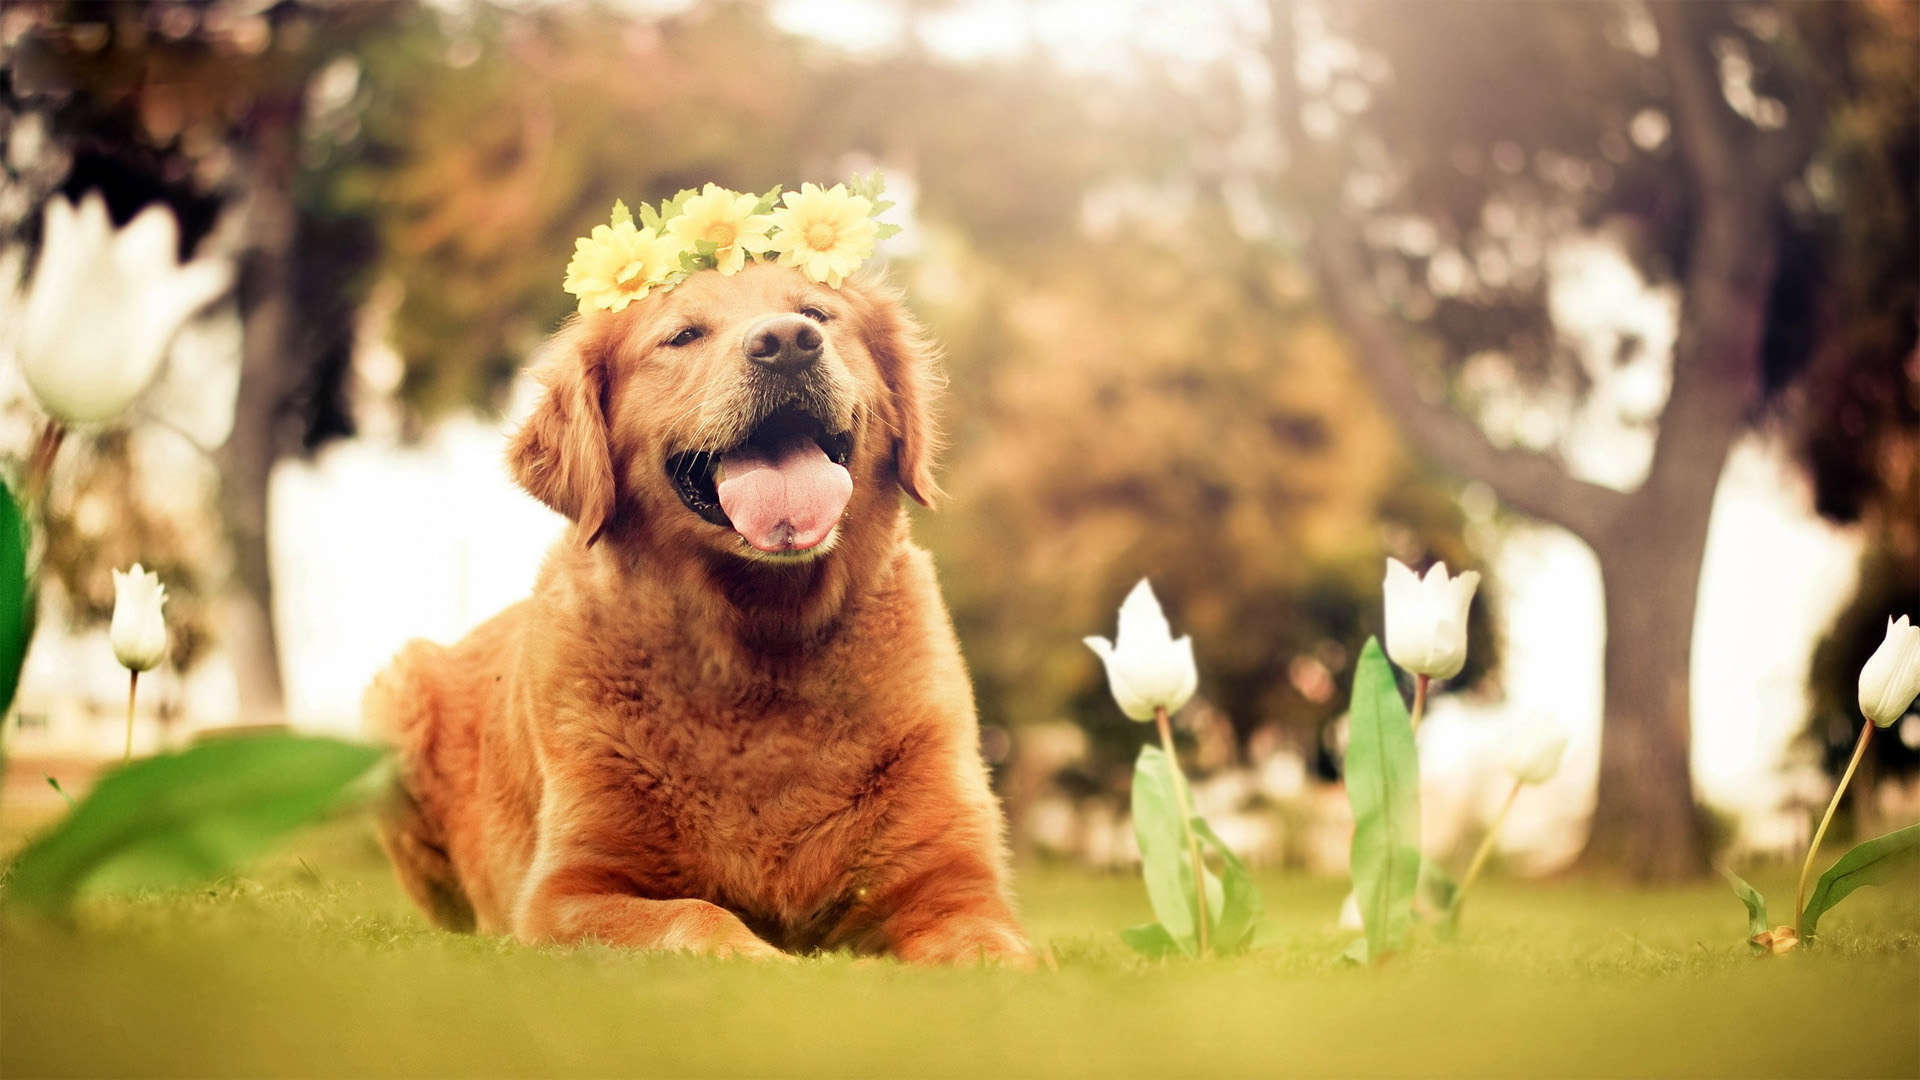 Golden Retriever wearing a flower crown while lying on the grass with flowers